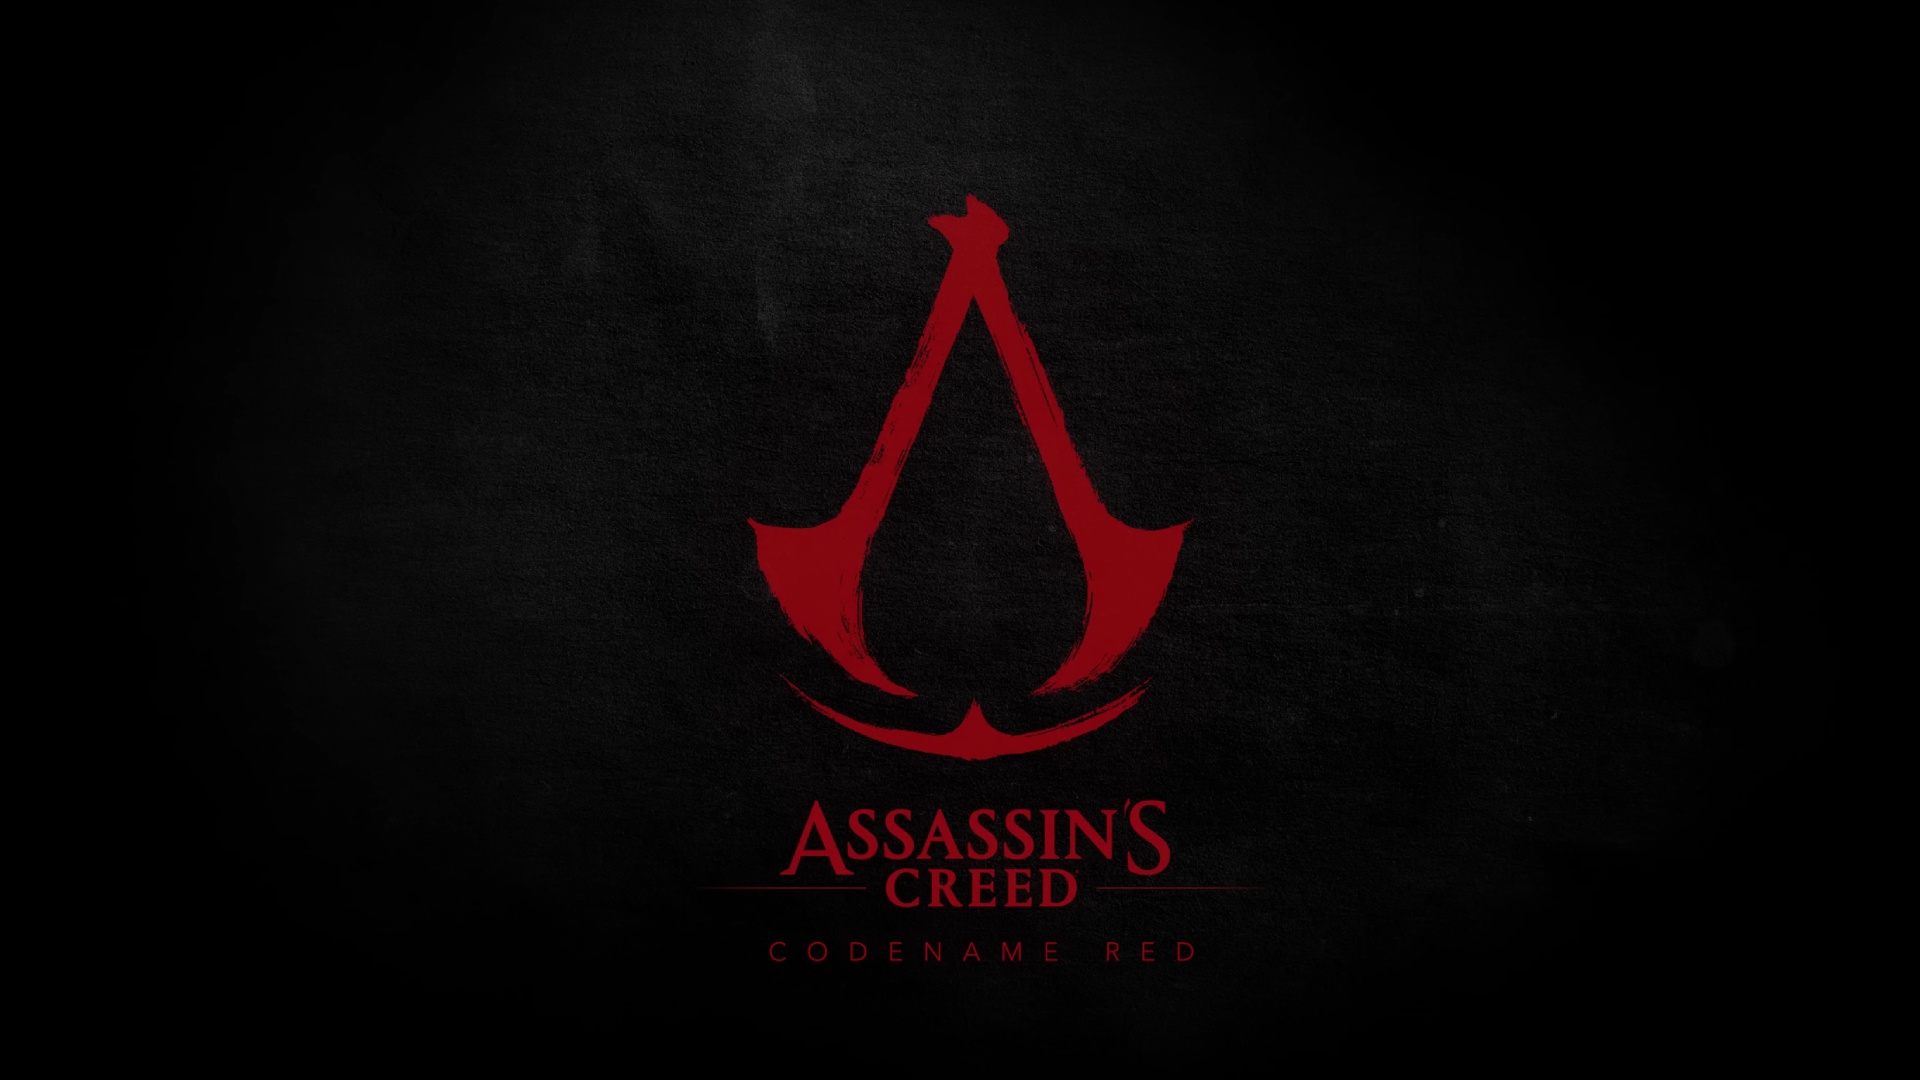 The Assassin's Creed Codename Red splash screen